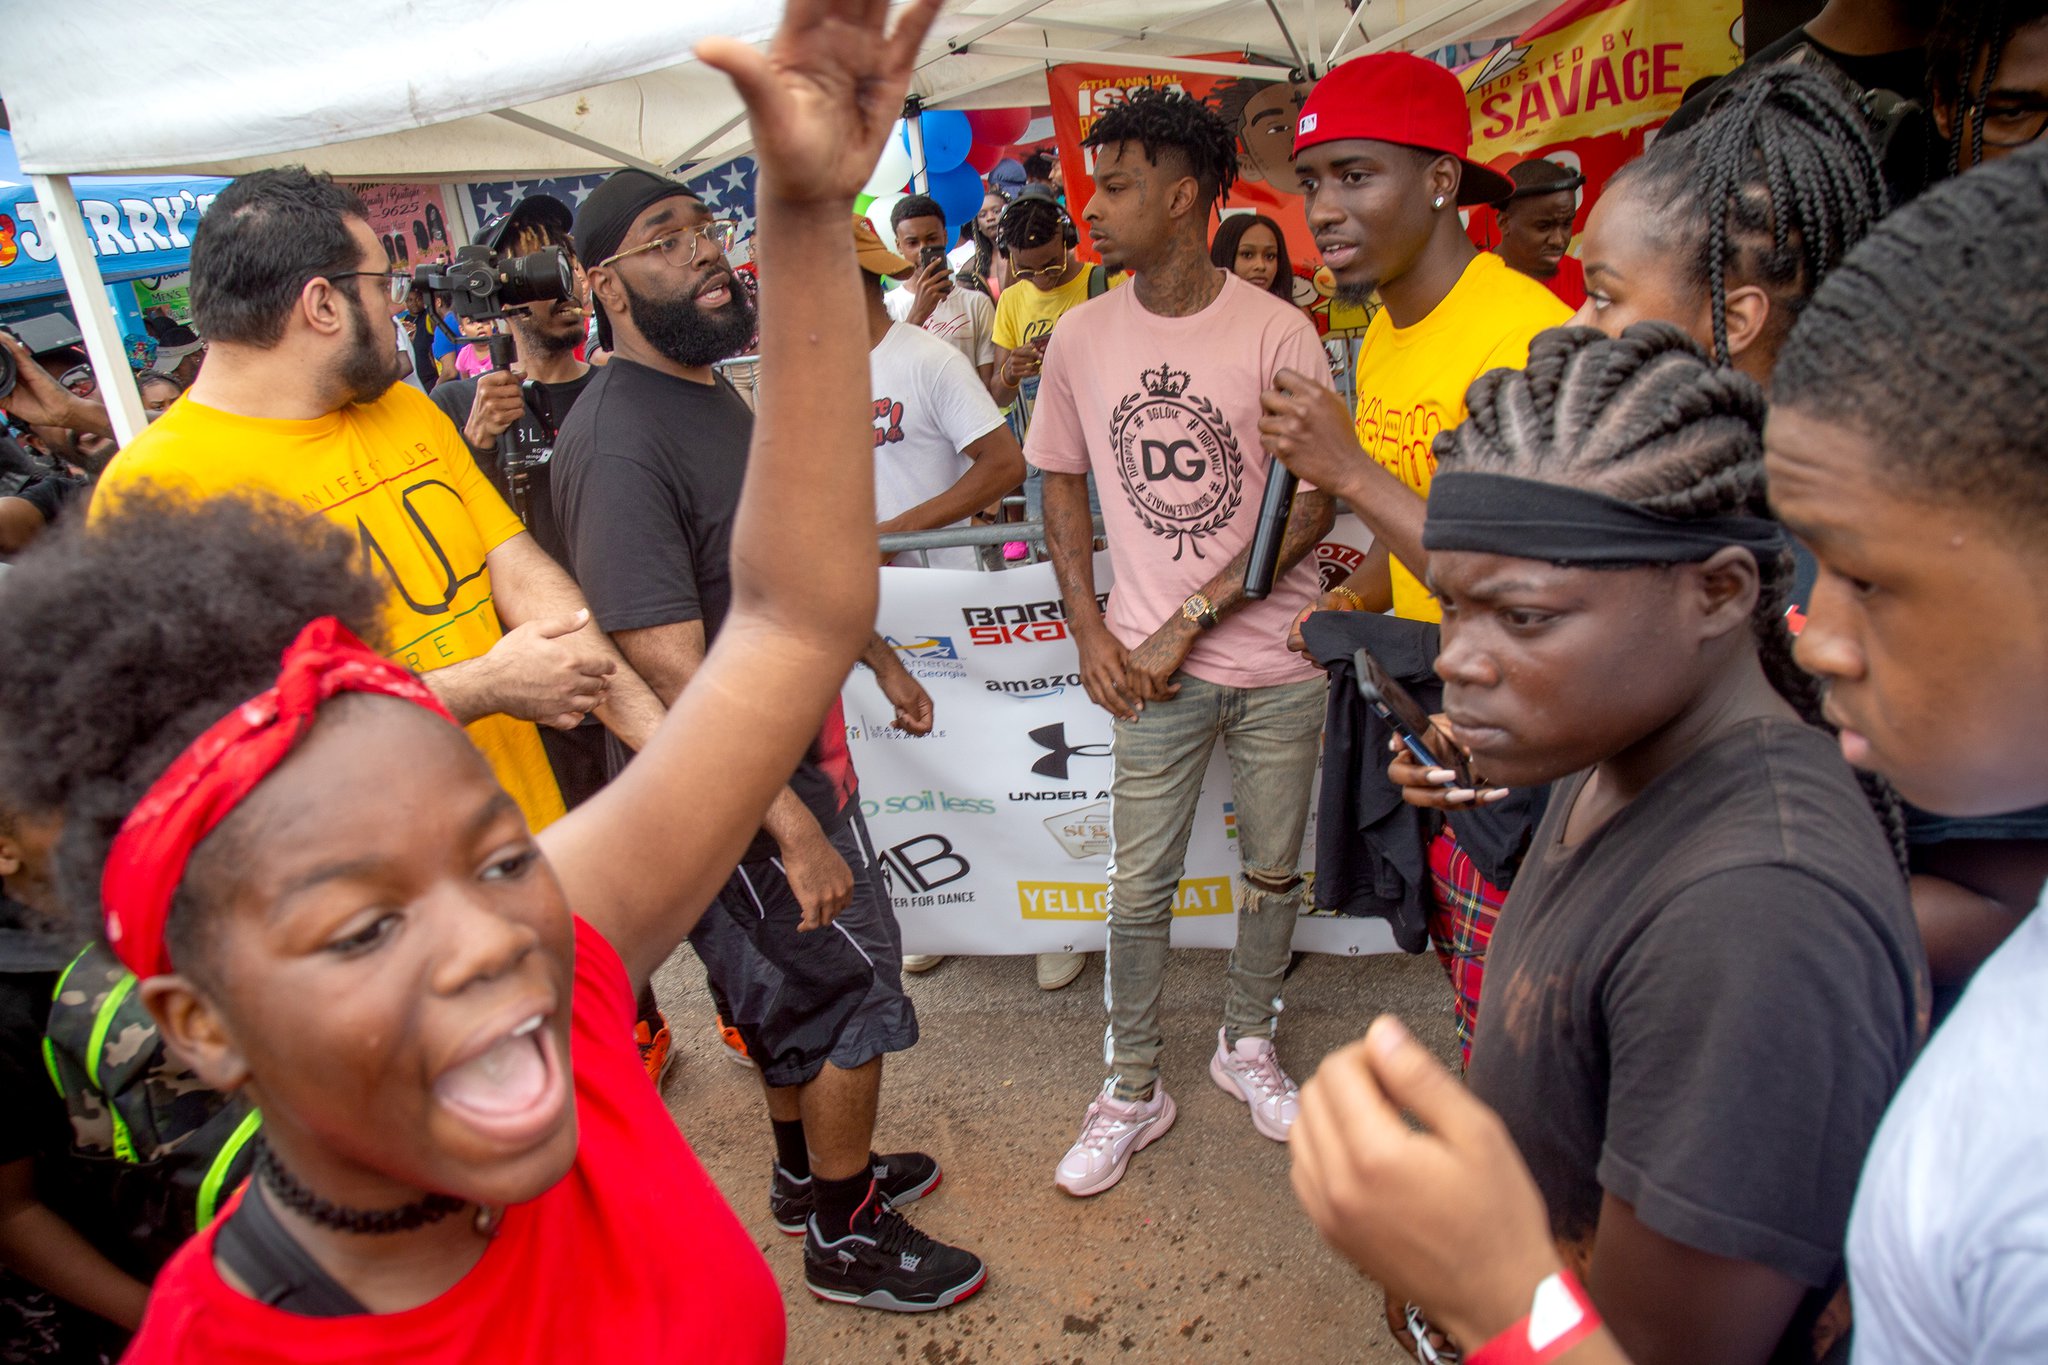 21 Savage Hosts “Issa Back To School Drive” In Hometown –